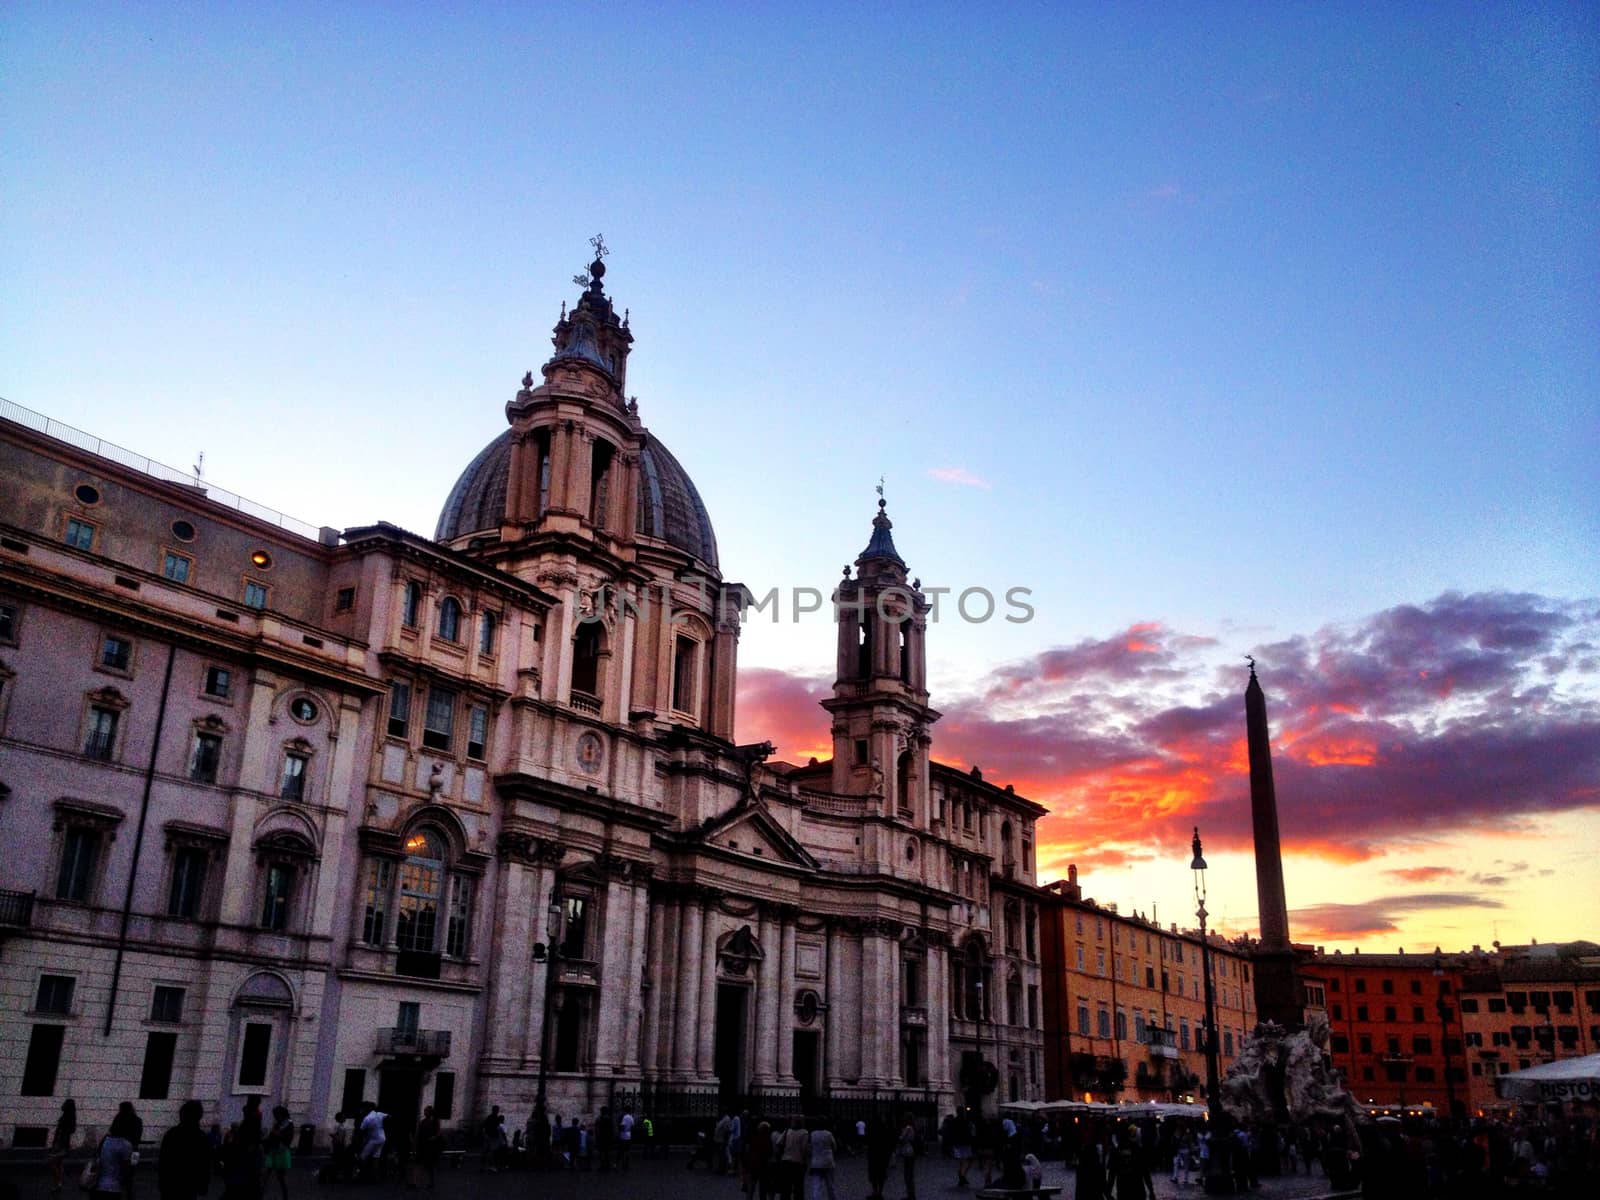 a warm sunset in a historical roman square